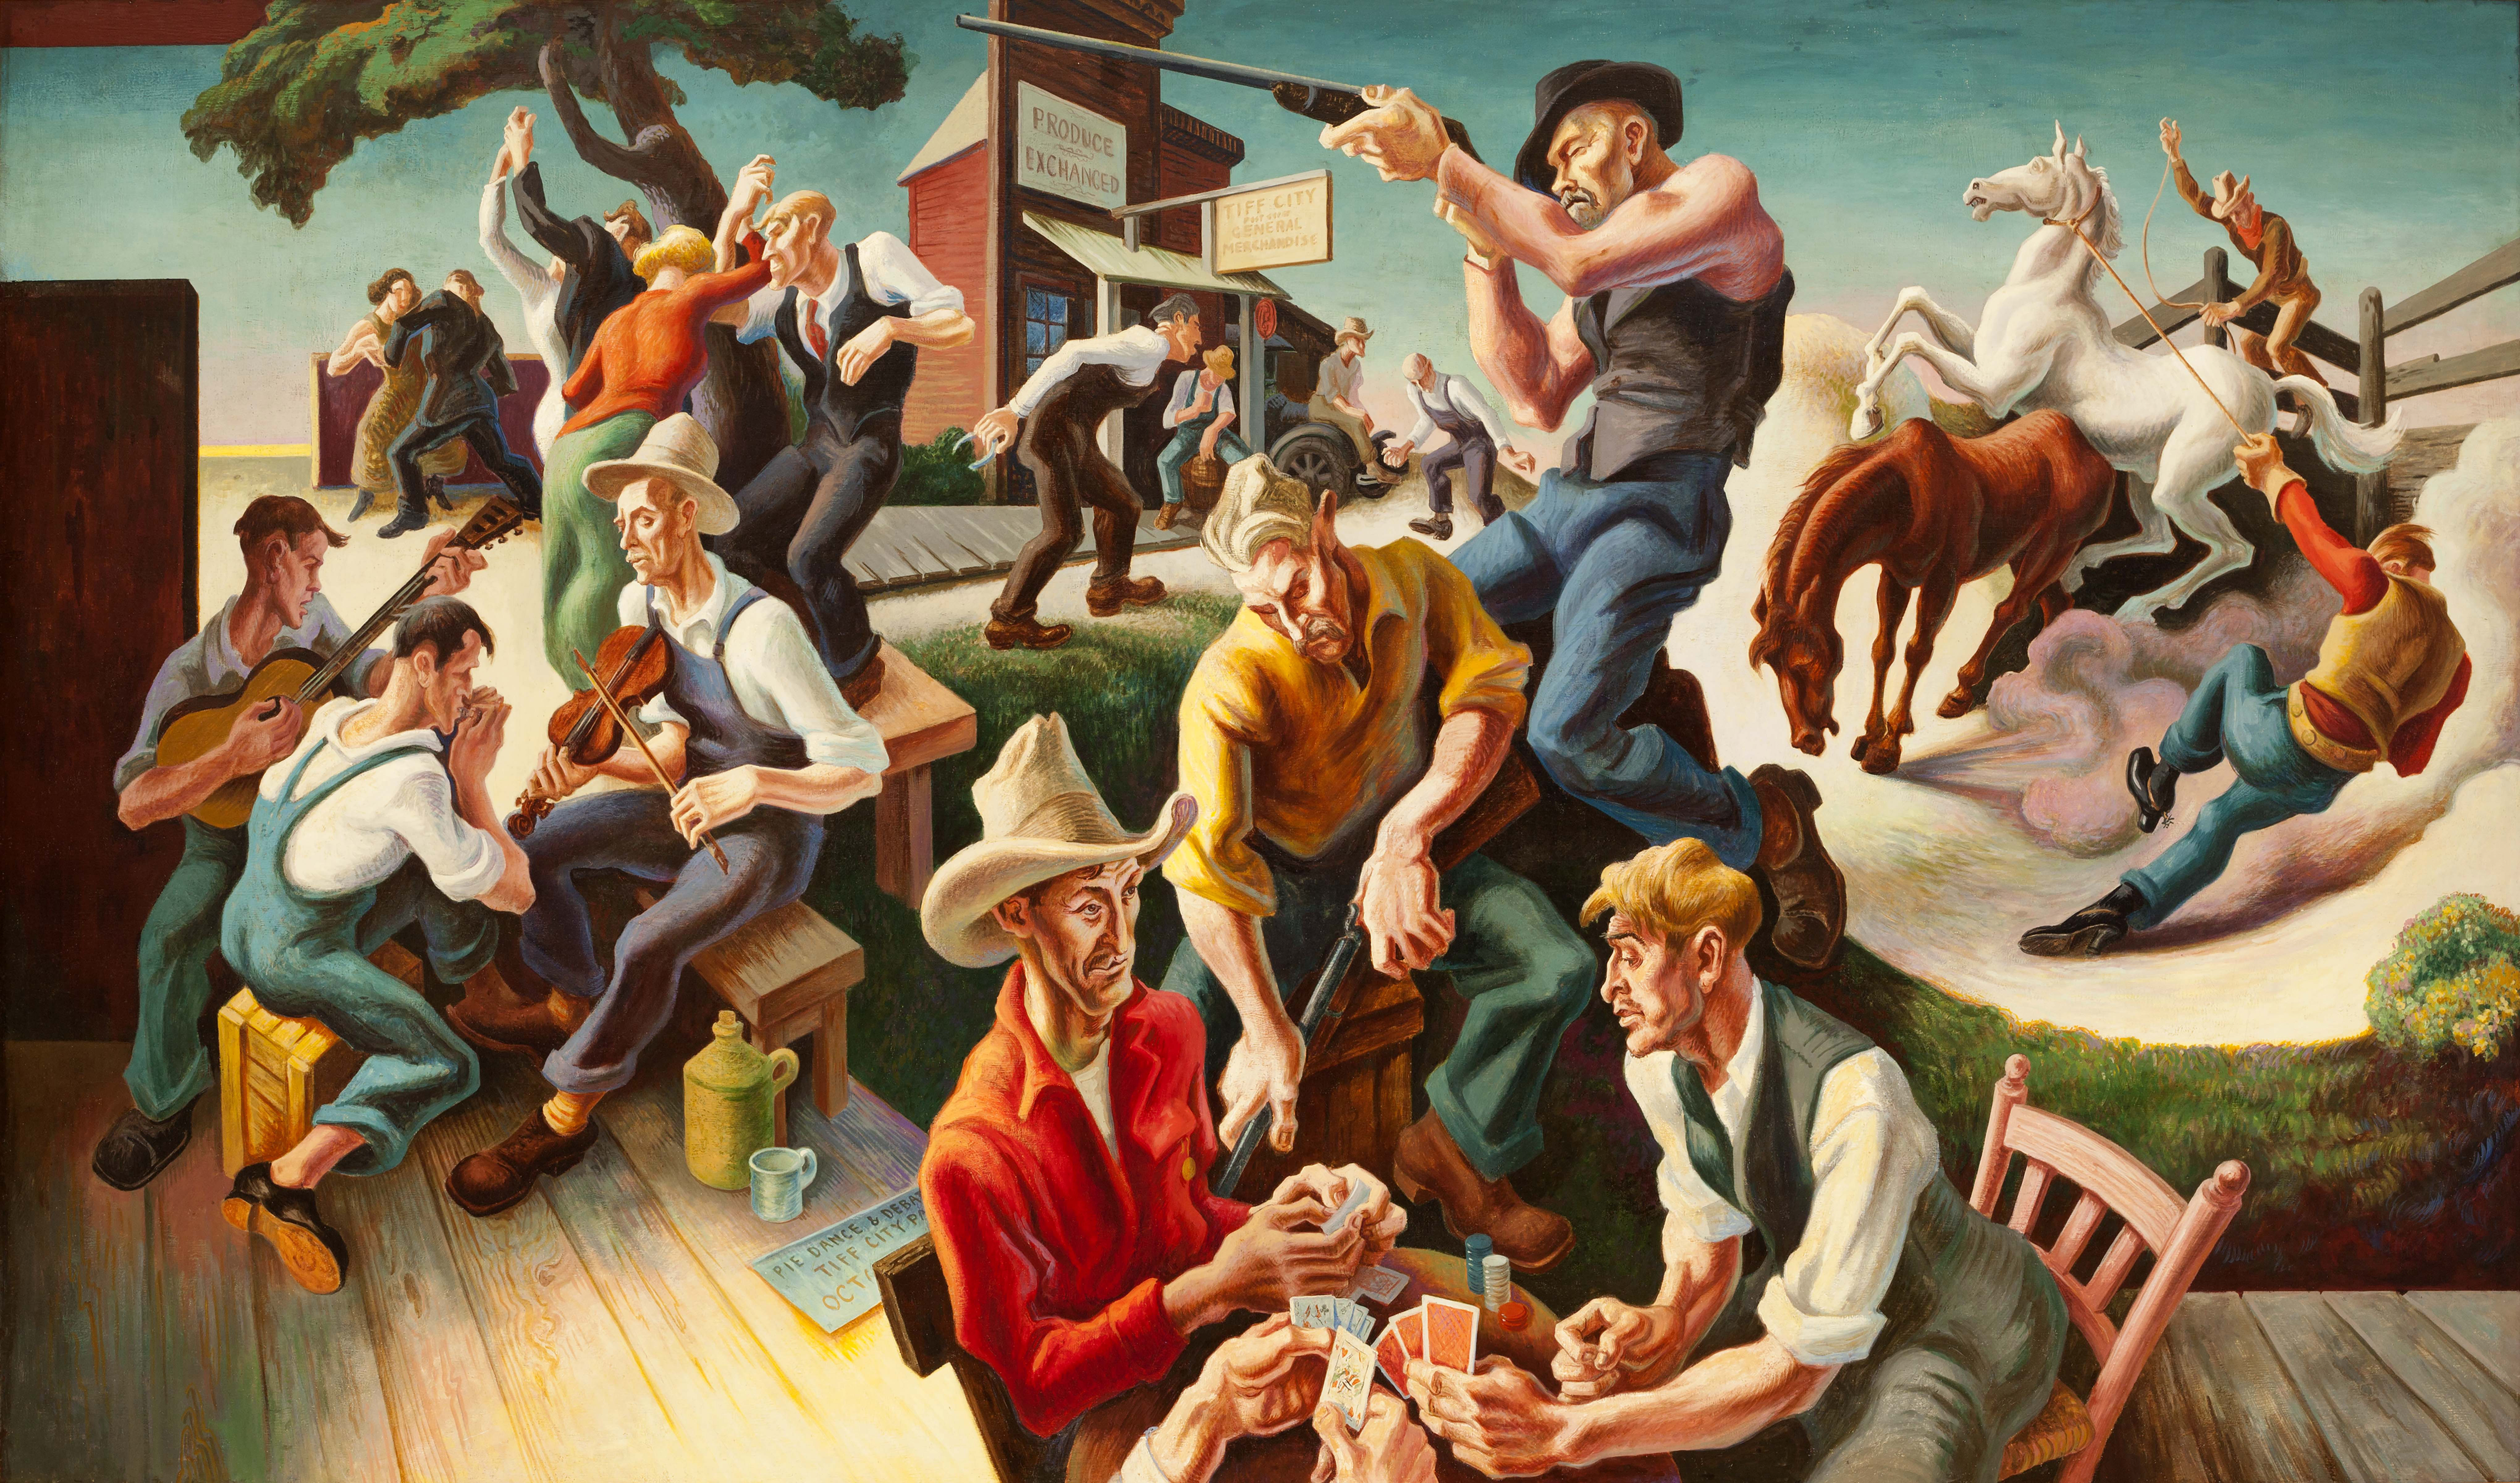 Thomas Hart Benton, <i>The Arts of Life in America: Arts of the West, </i> 1932, Egg tempera and oil glaze on linen, 93 3/4 x 159 1/2 in., Harriet Russell Stanley Fund